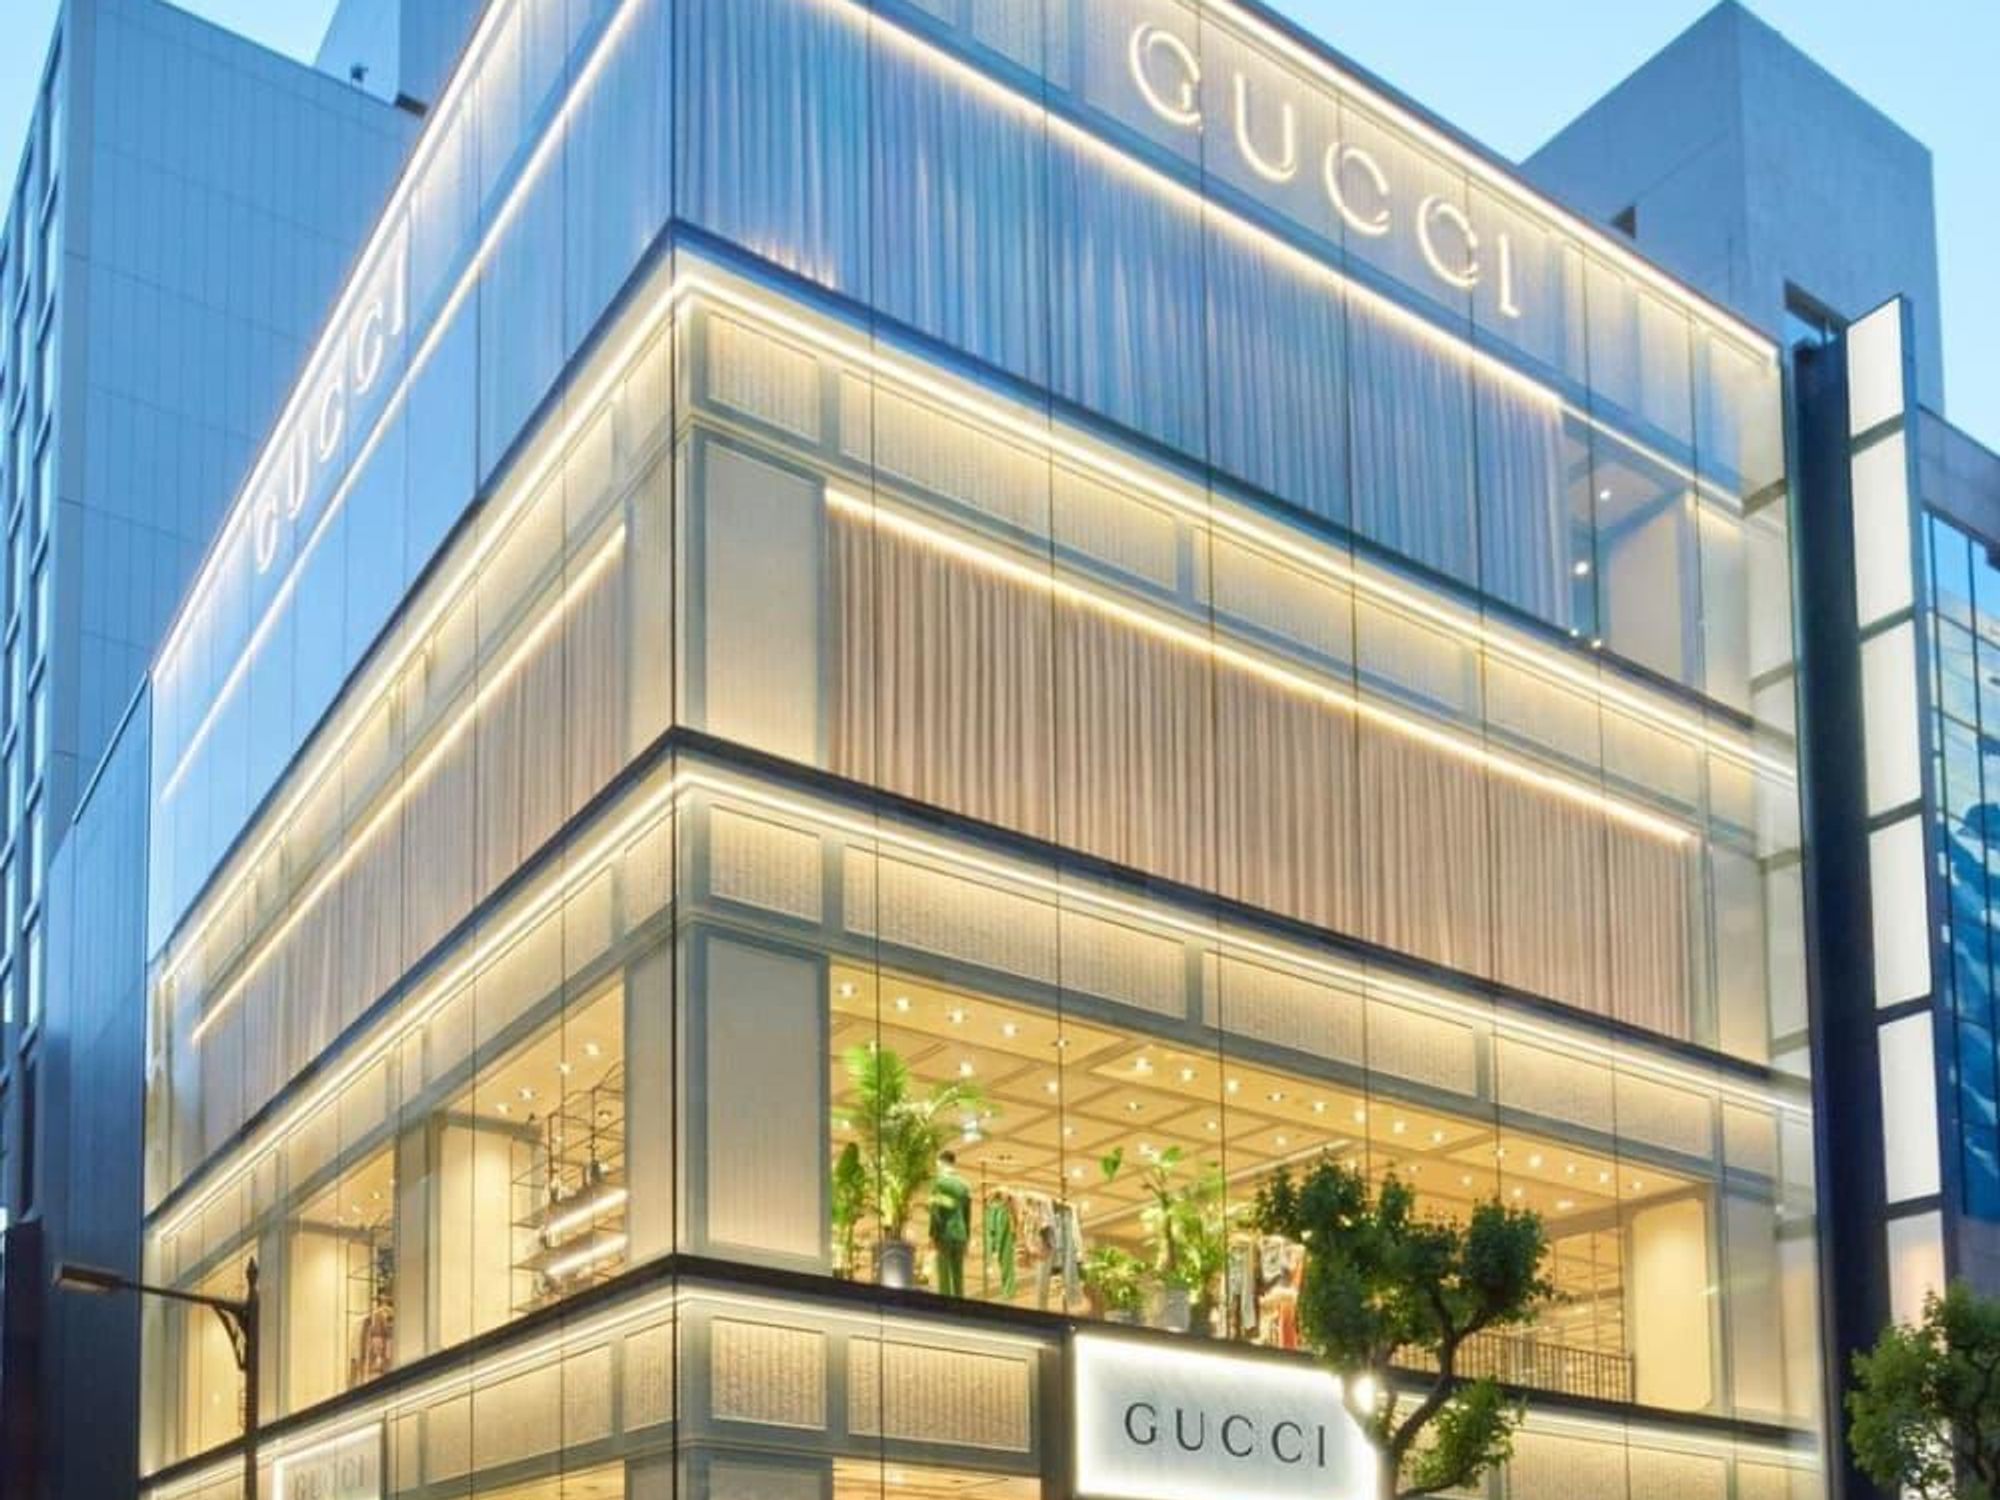 GucciGhost Has Tagged Gucci's Manhattan Flagship Store